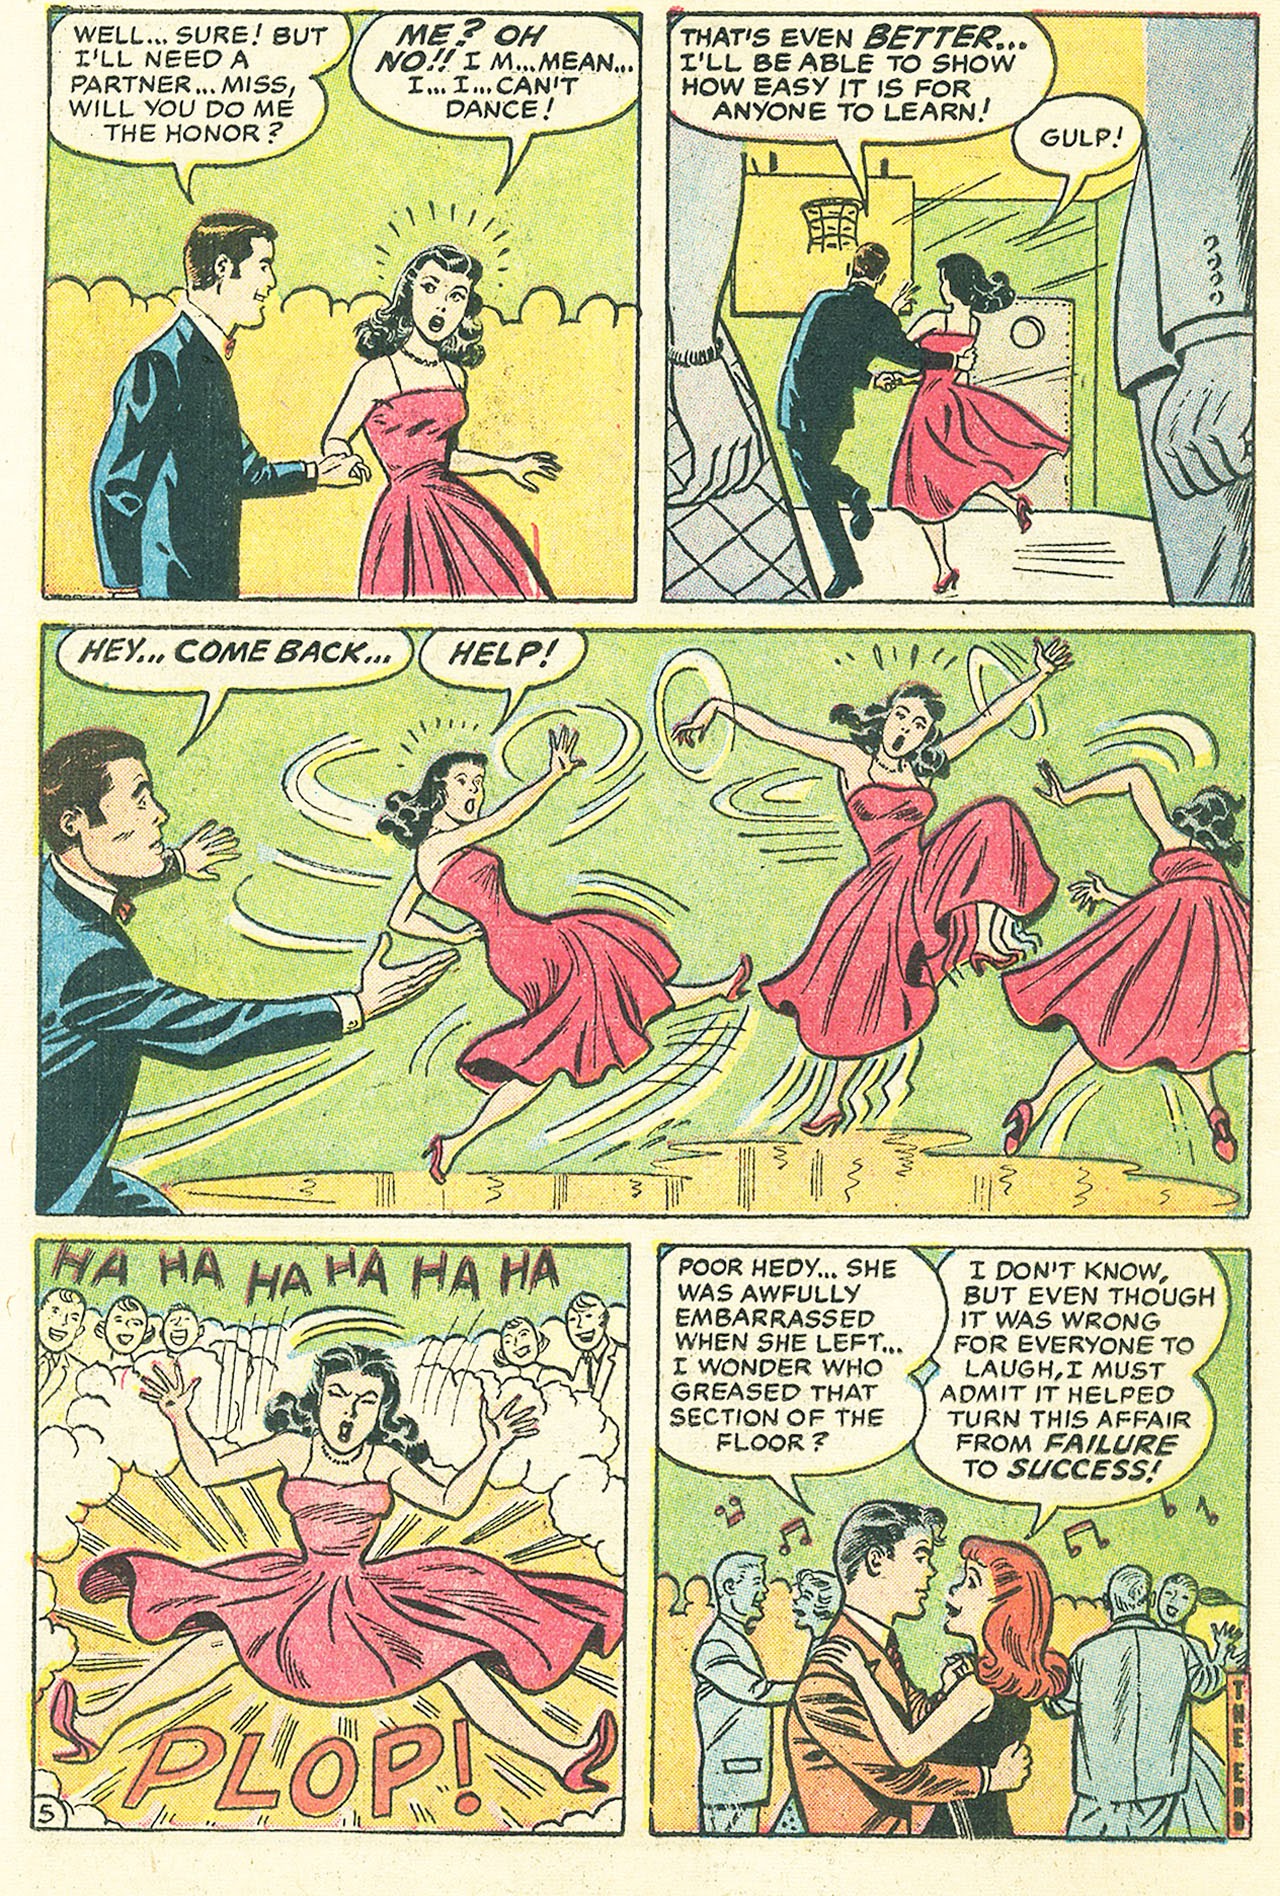 Read online Patsy and Hedy comic -  Issue #42 - 14